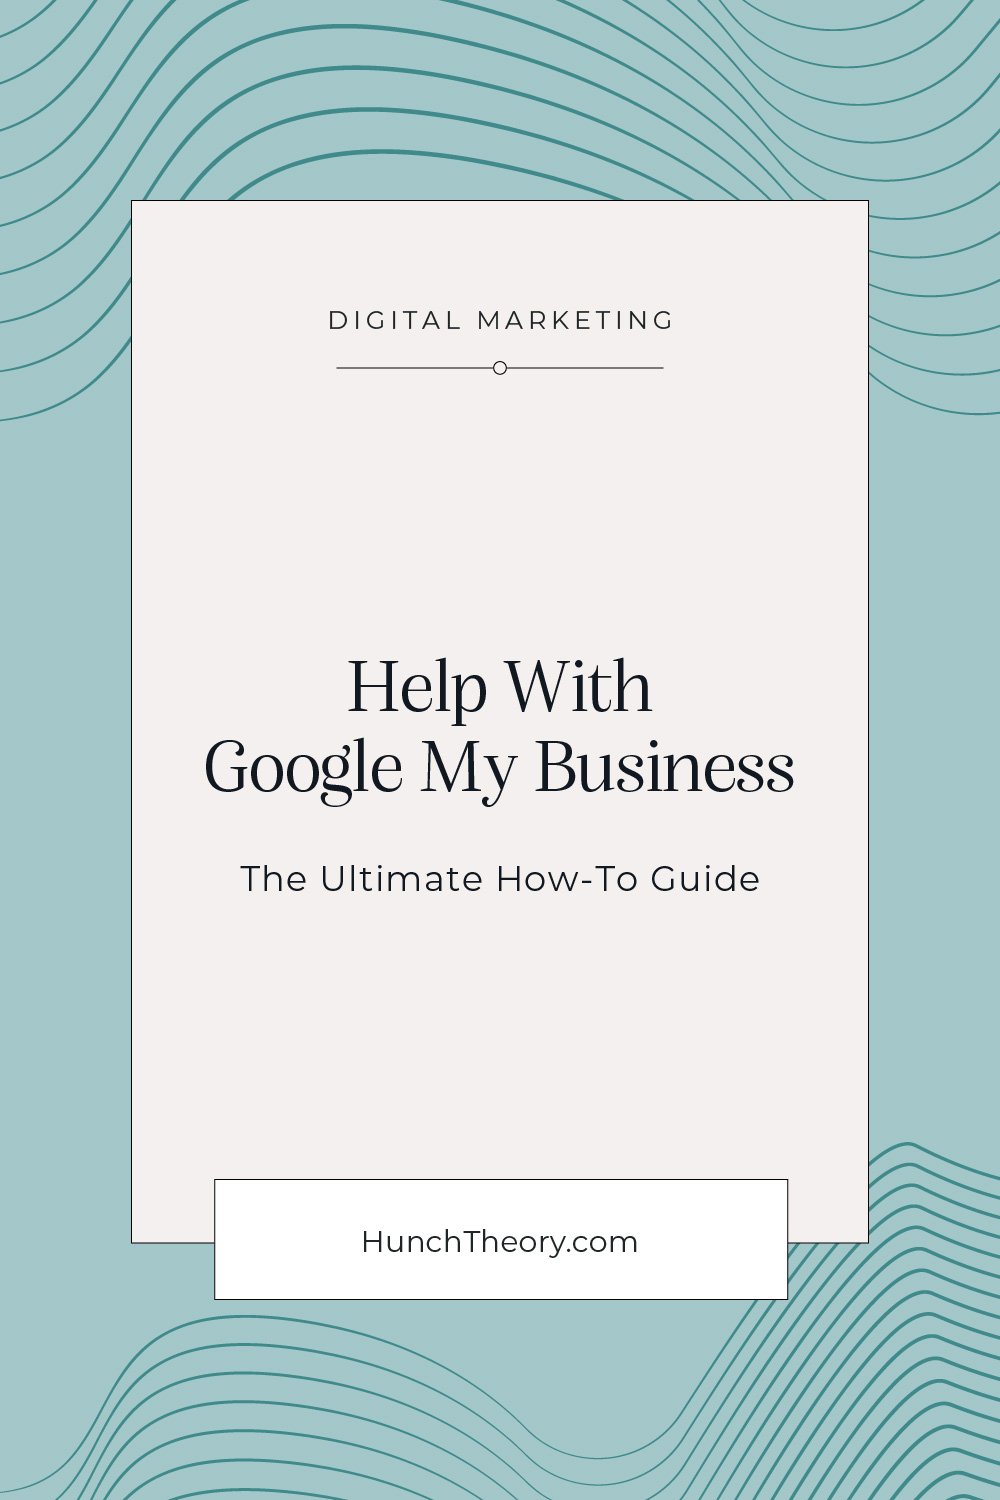 A Guide to Help with Google My Business